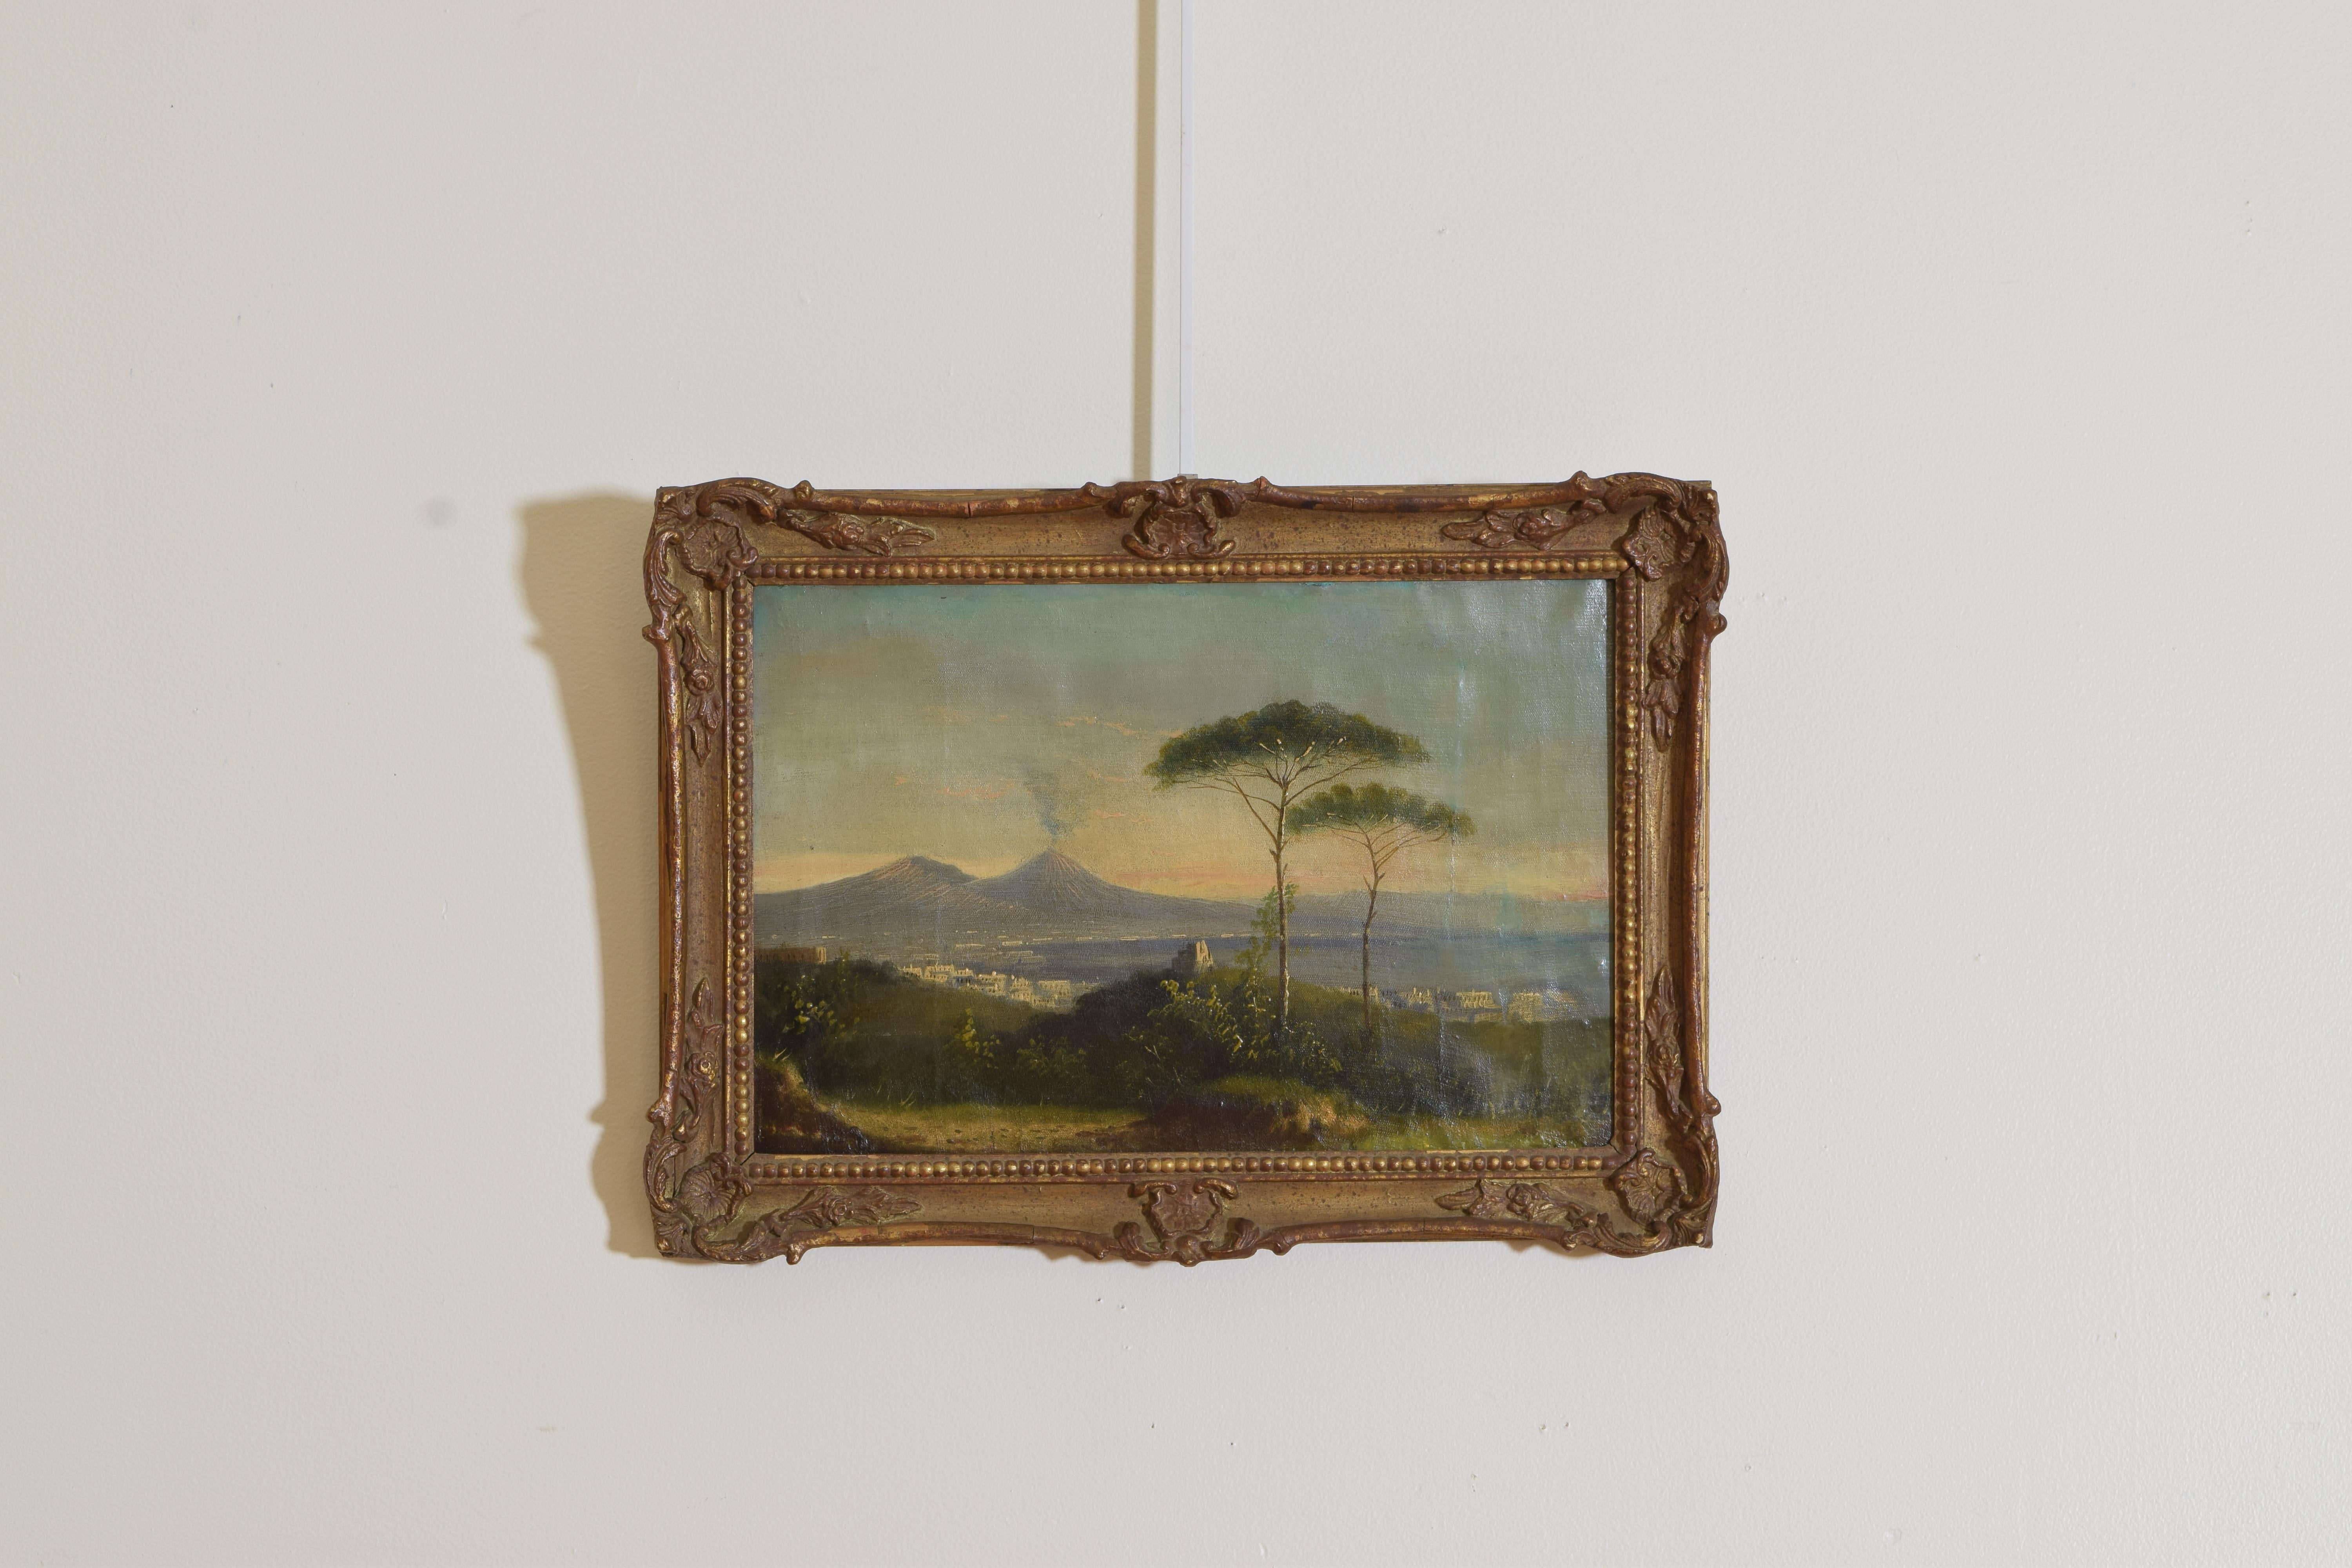 This oil painting depicts a smoking Mt. Vesuvius with the famous Pine of Naples in the foreground, artist Donald Stewart, in antique carved giltwood frame.